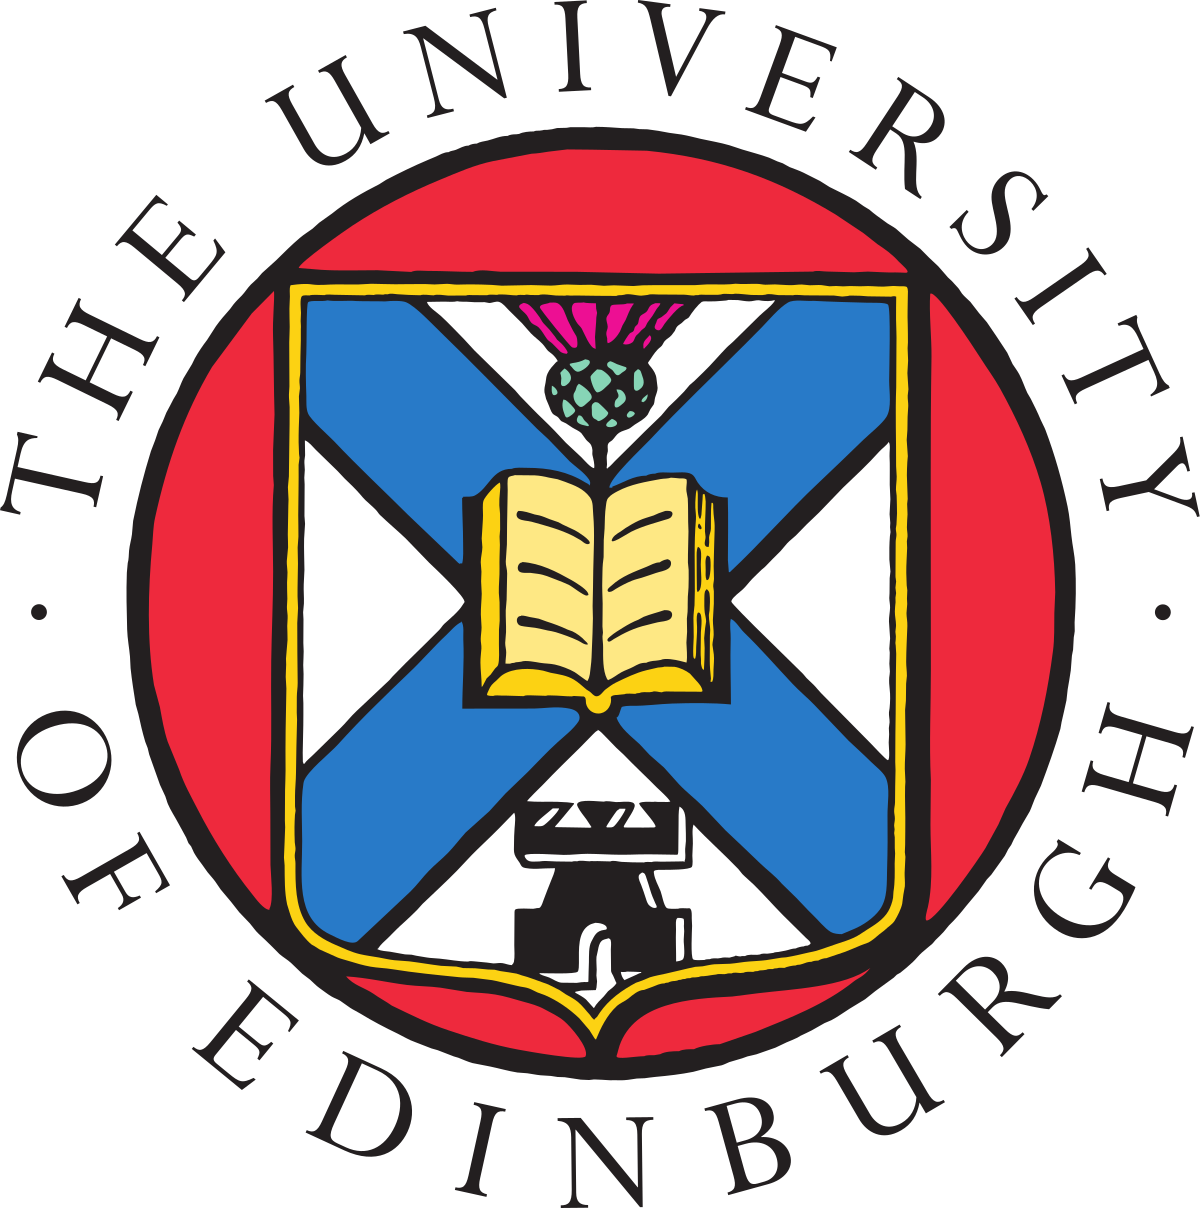 You are currently viewing University of Edinburgh: Exhibition to shine light on steel magnate’s past